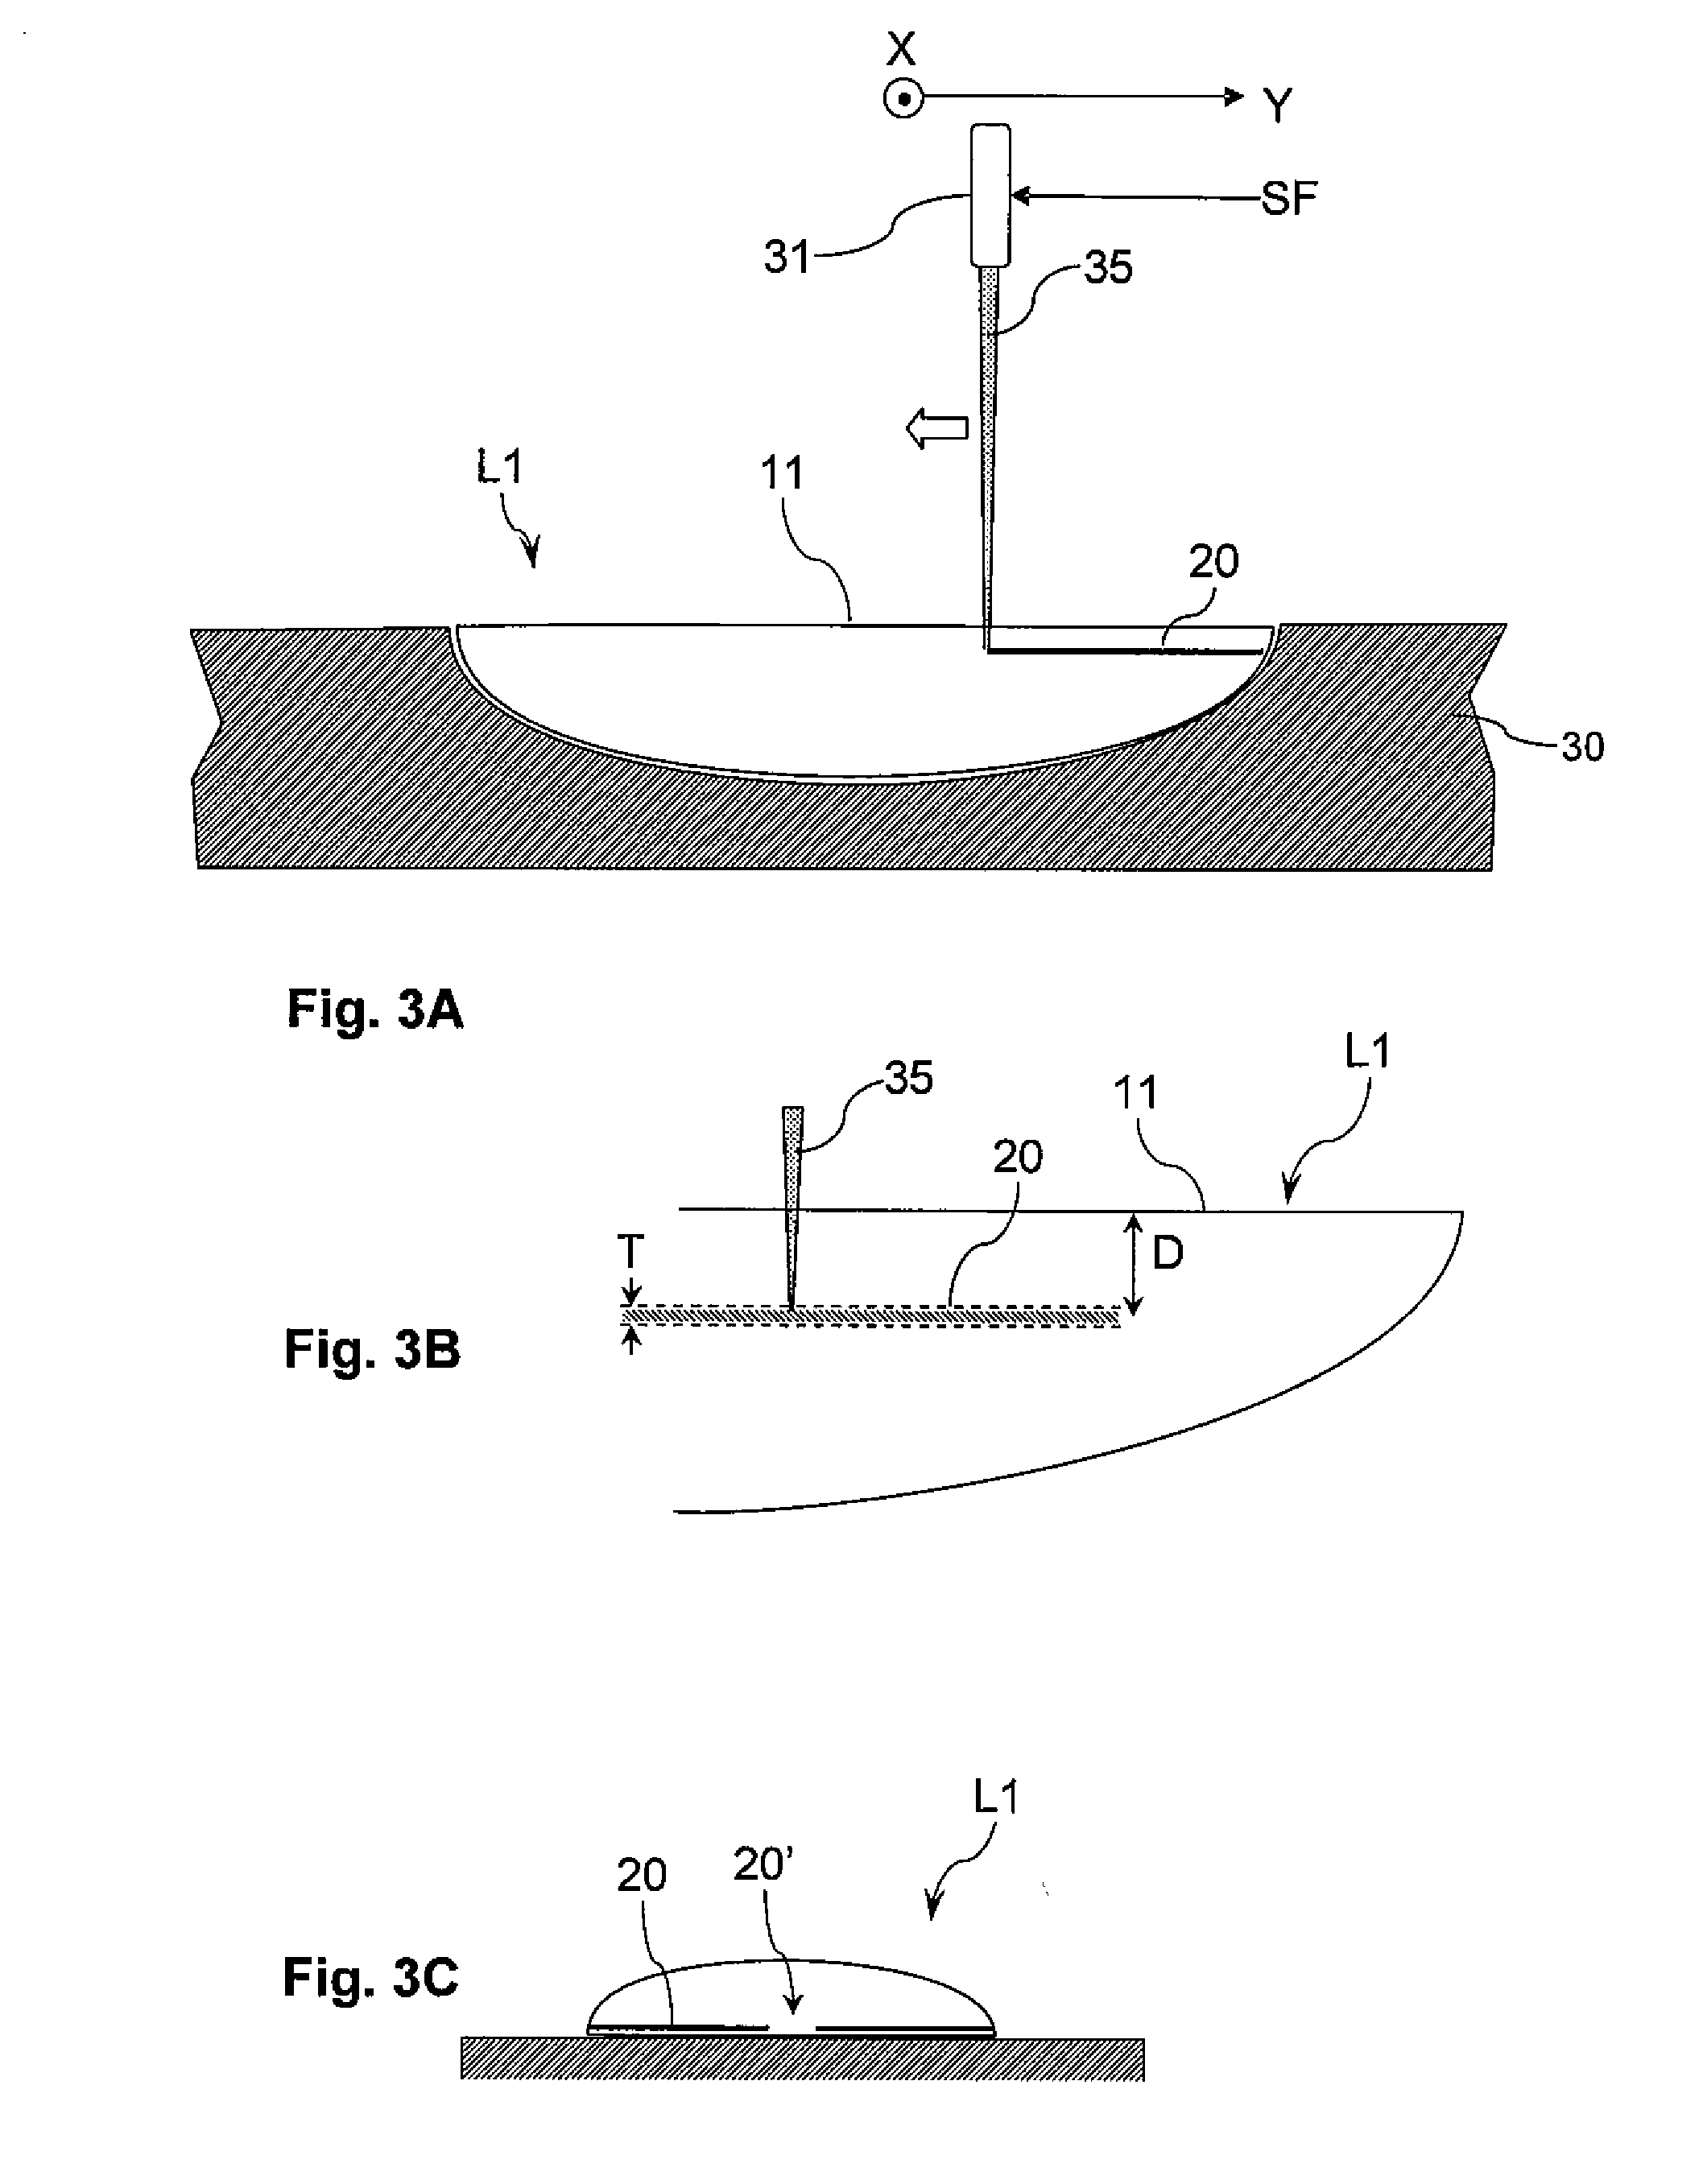 Method for manufacturing lenses, in particular for an imager comprising a diaphragm